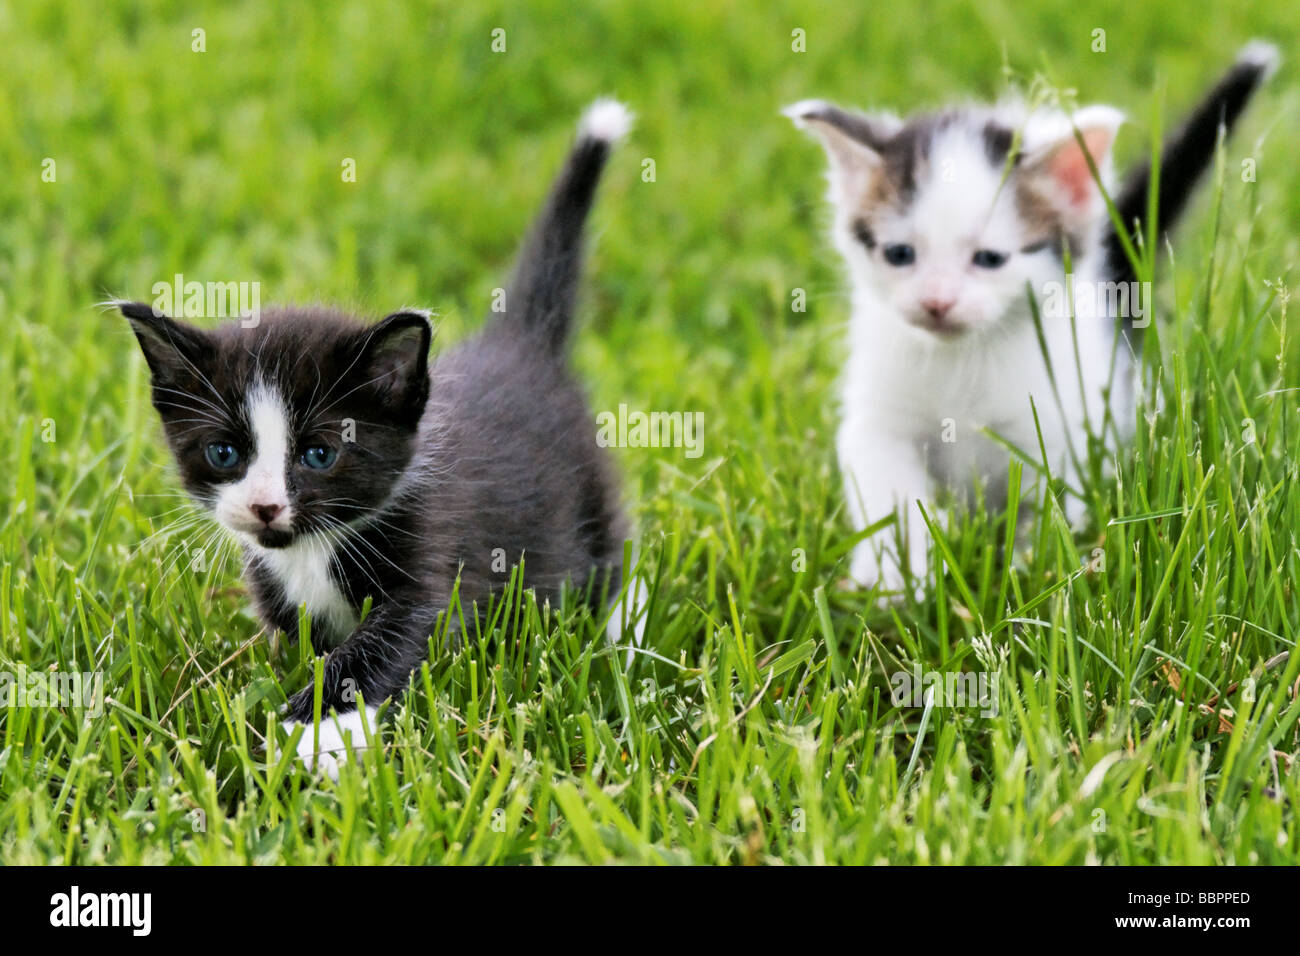 Kittens playing outside in the grass. Stock Photo